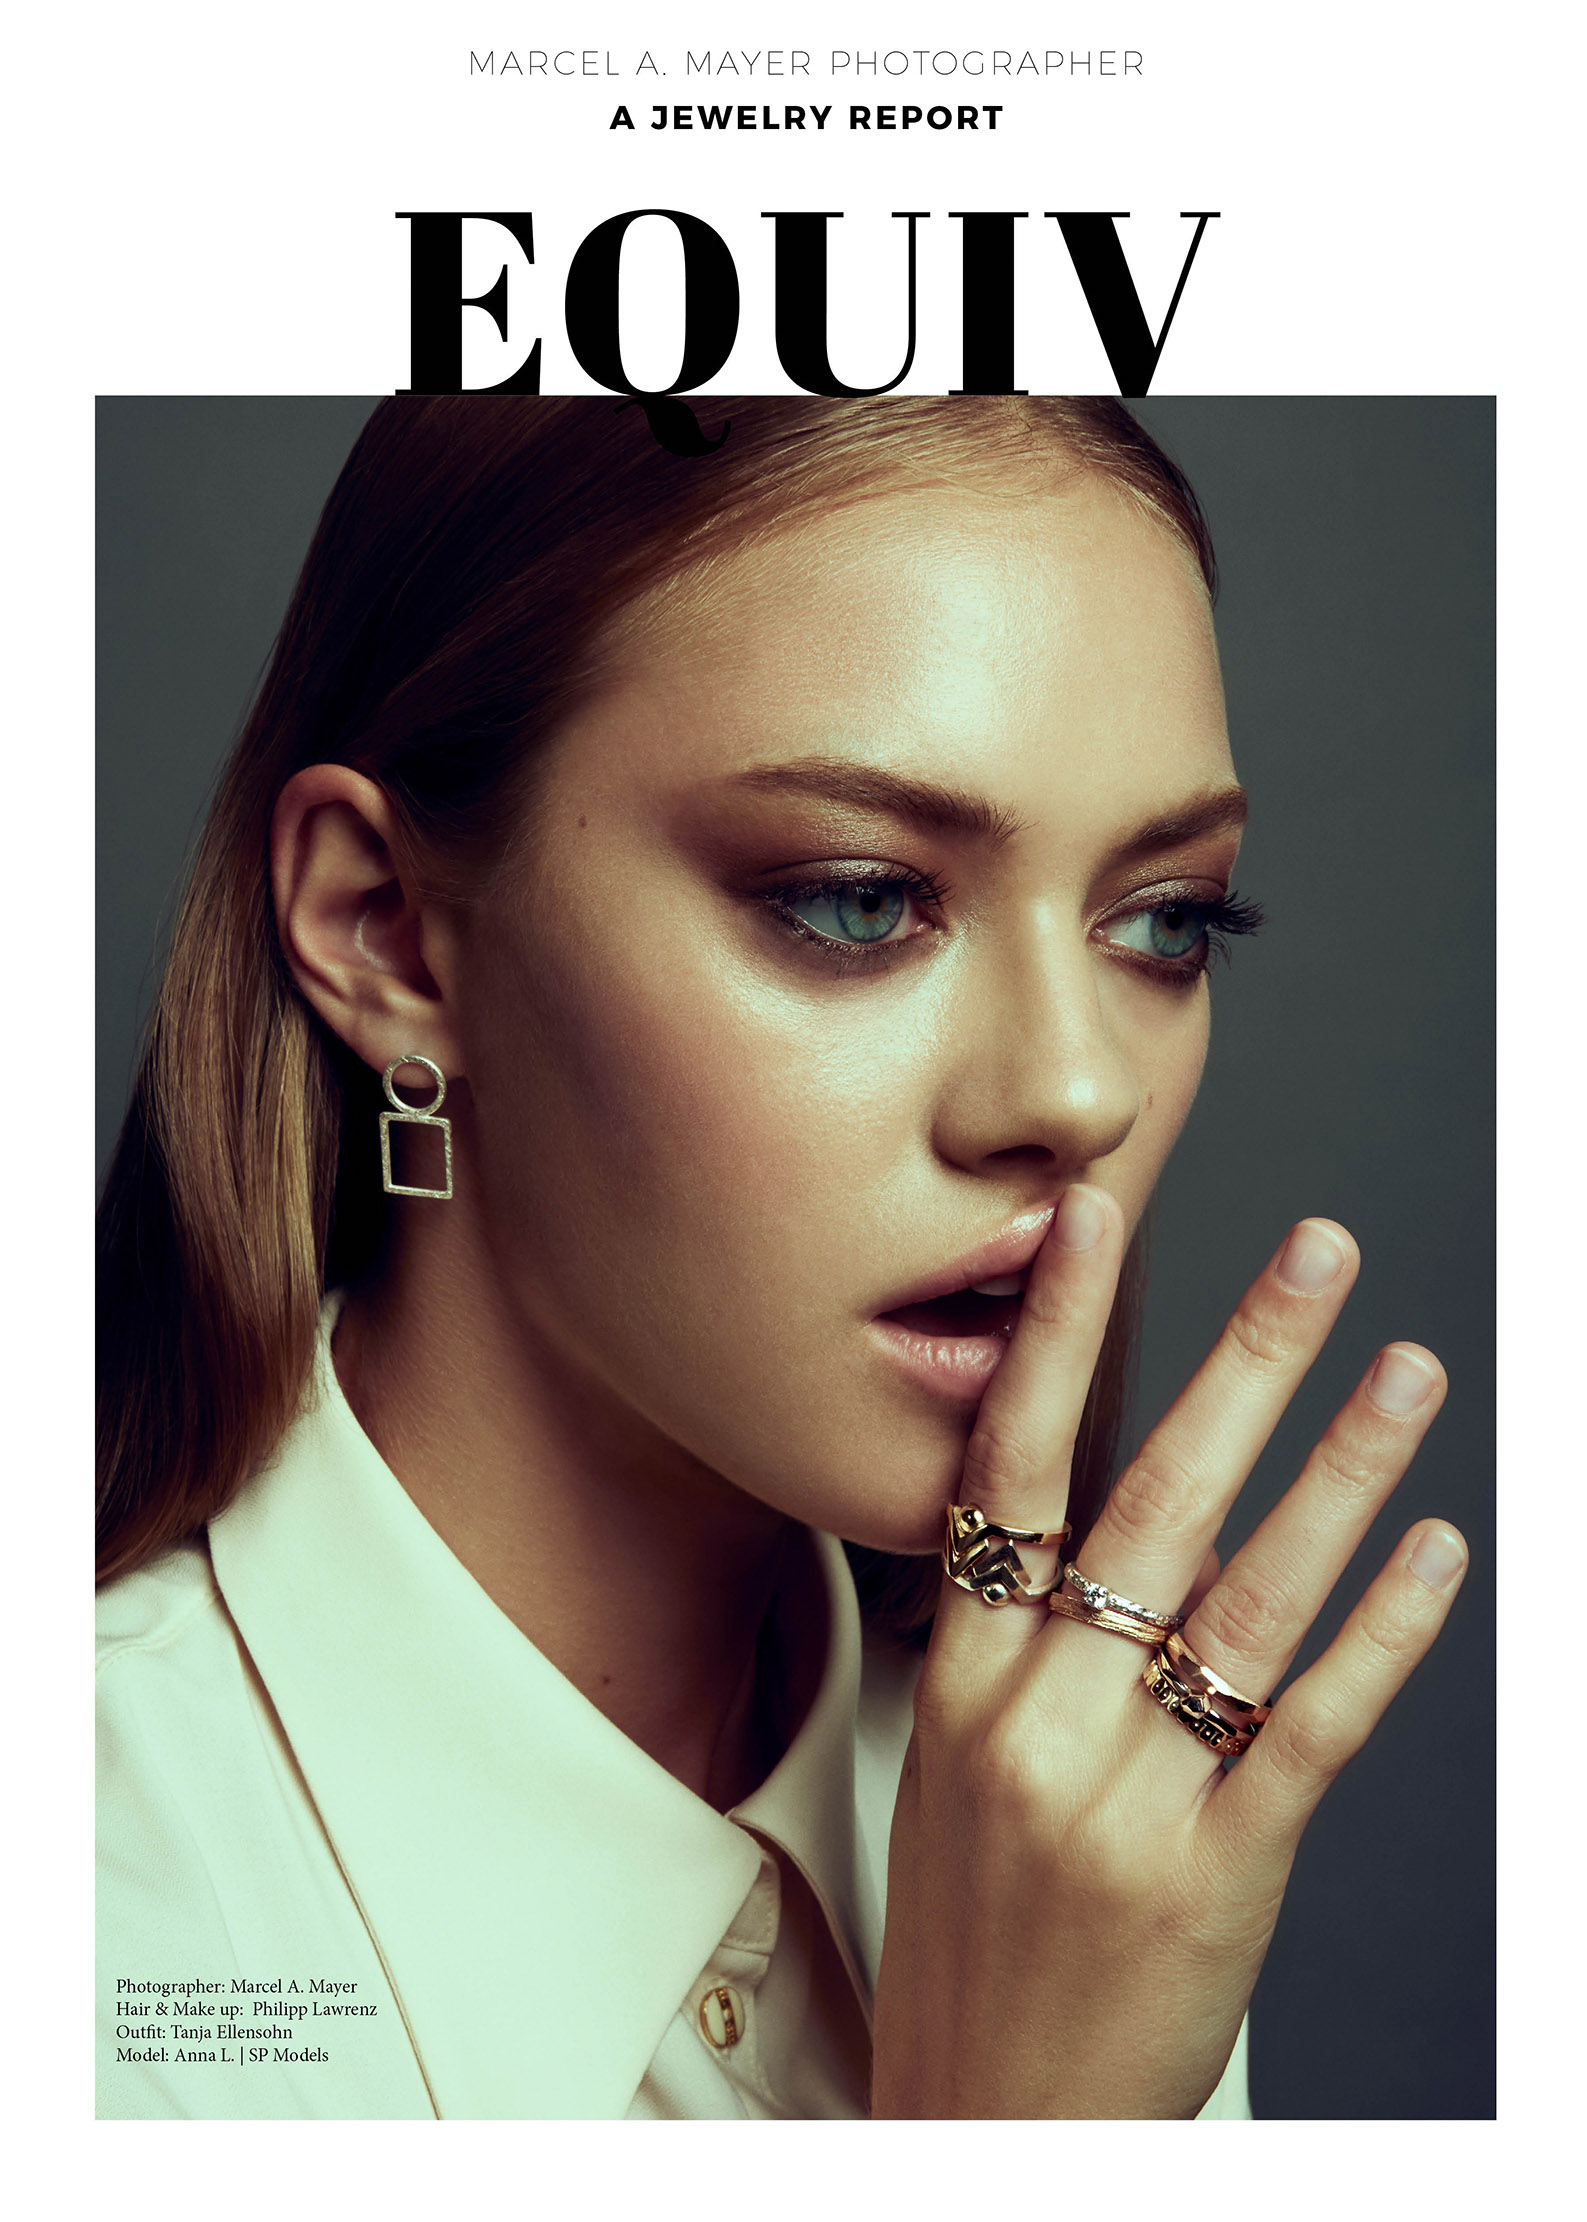 Equiv Jewelry Cover ring Fashion Beauty Marcel Mayer Photographer Skin